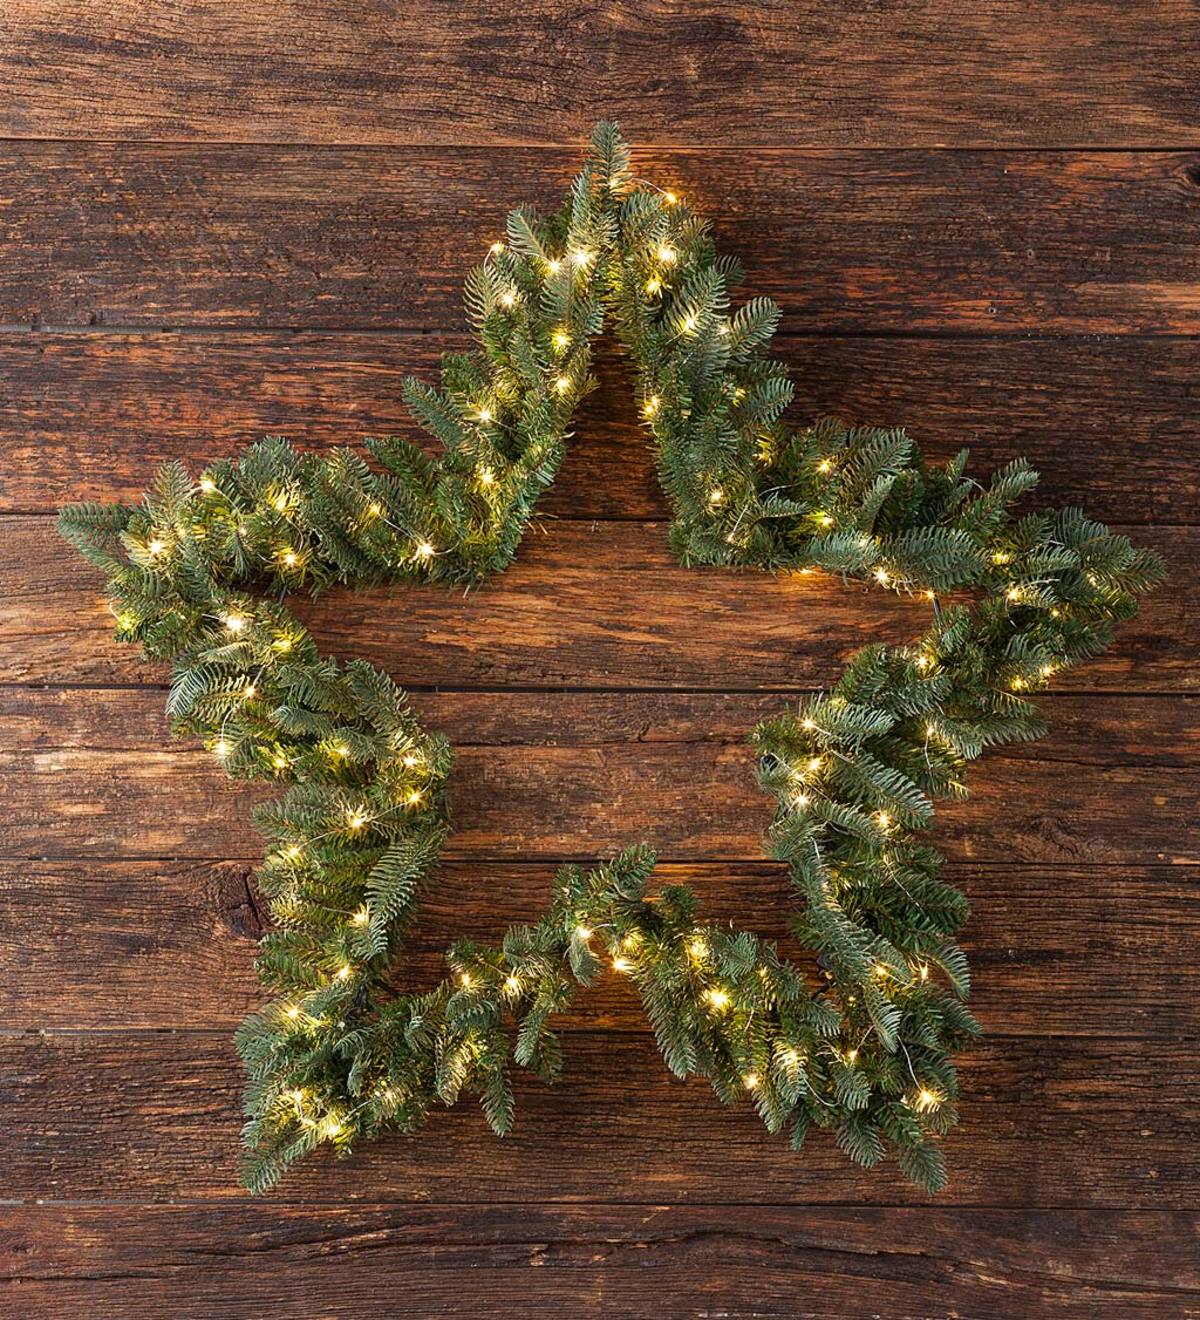 Small Holiday Star Wreath